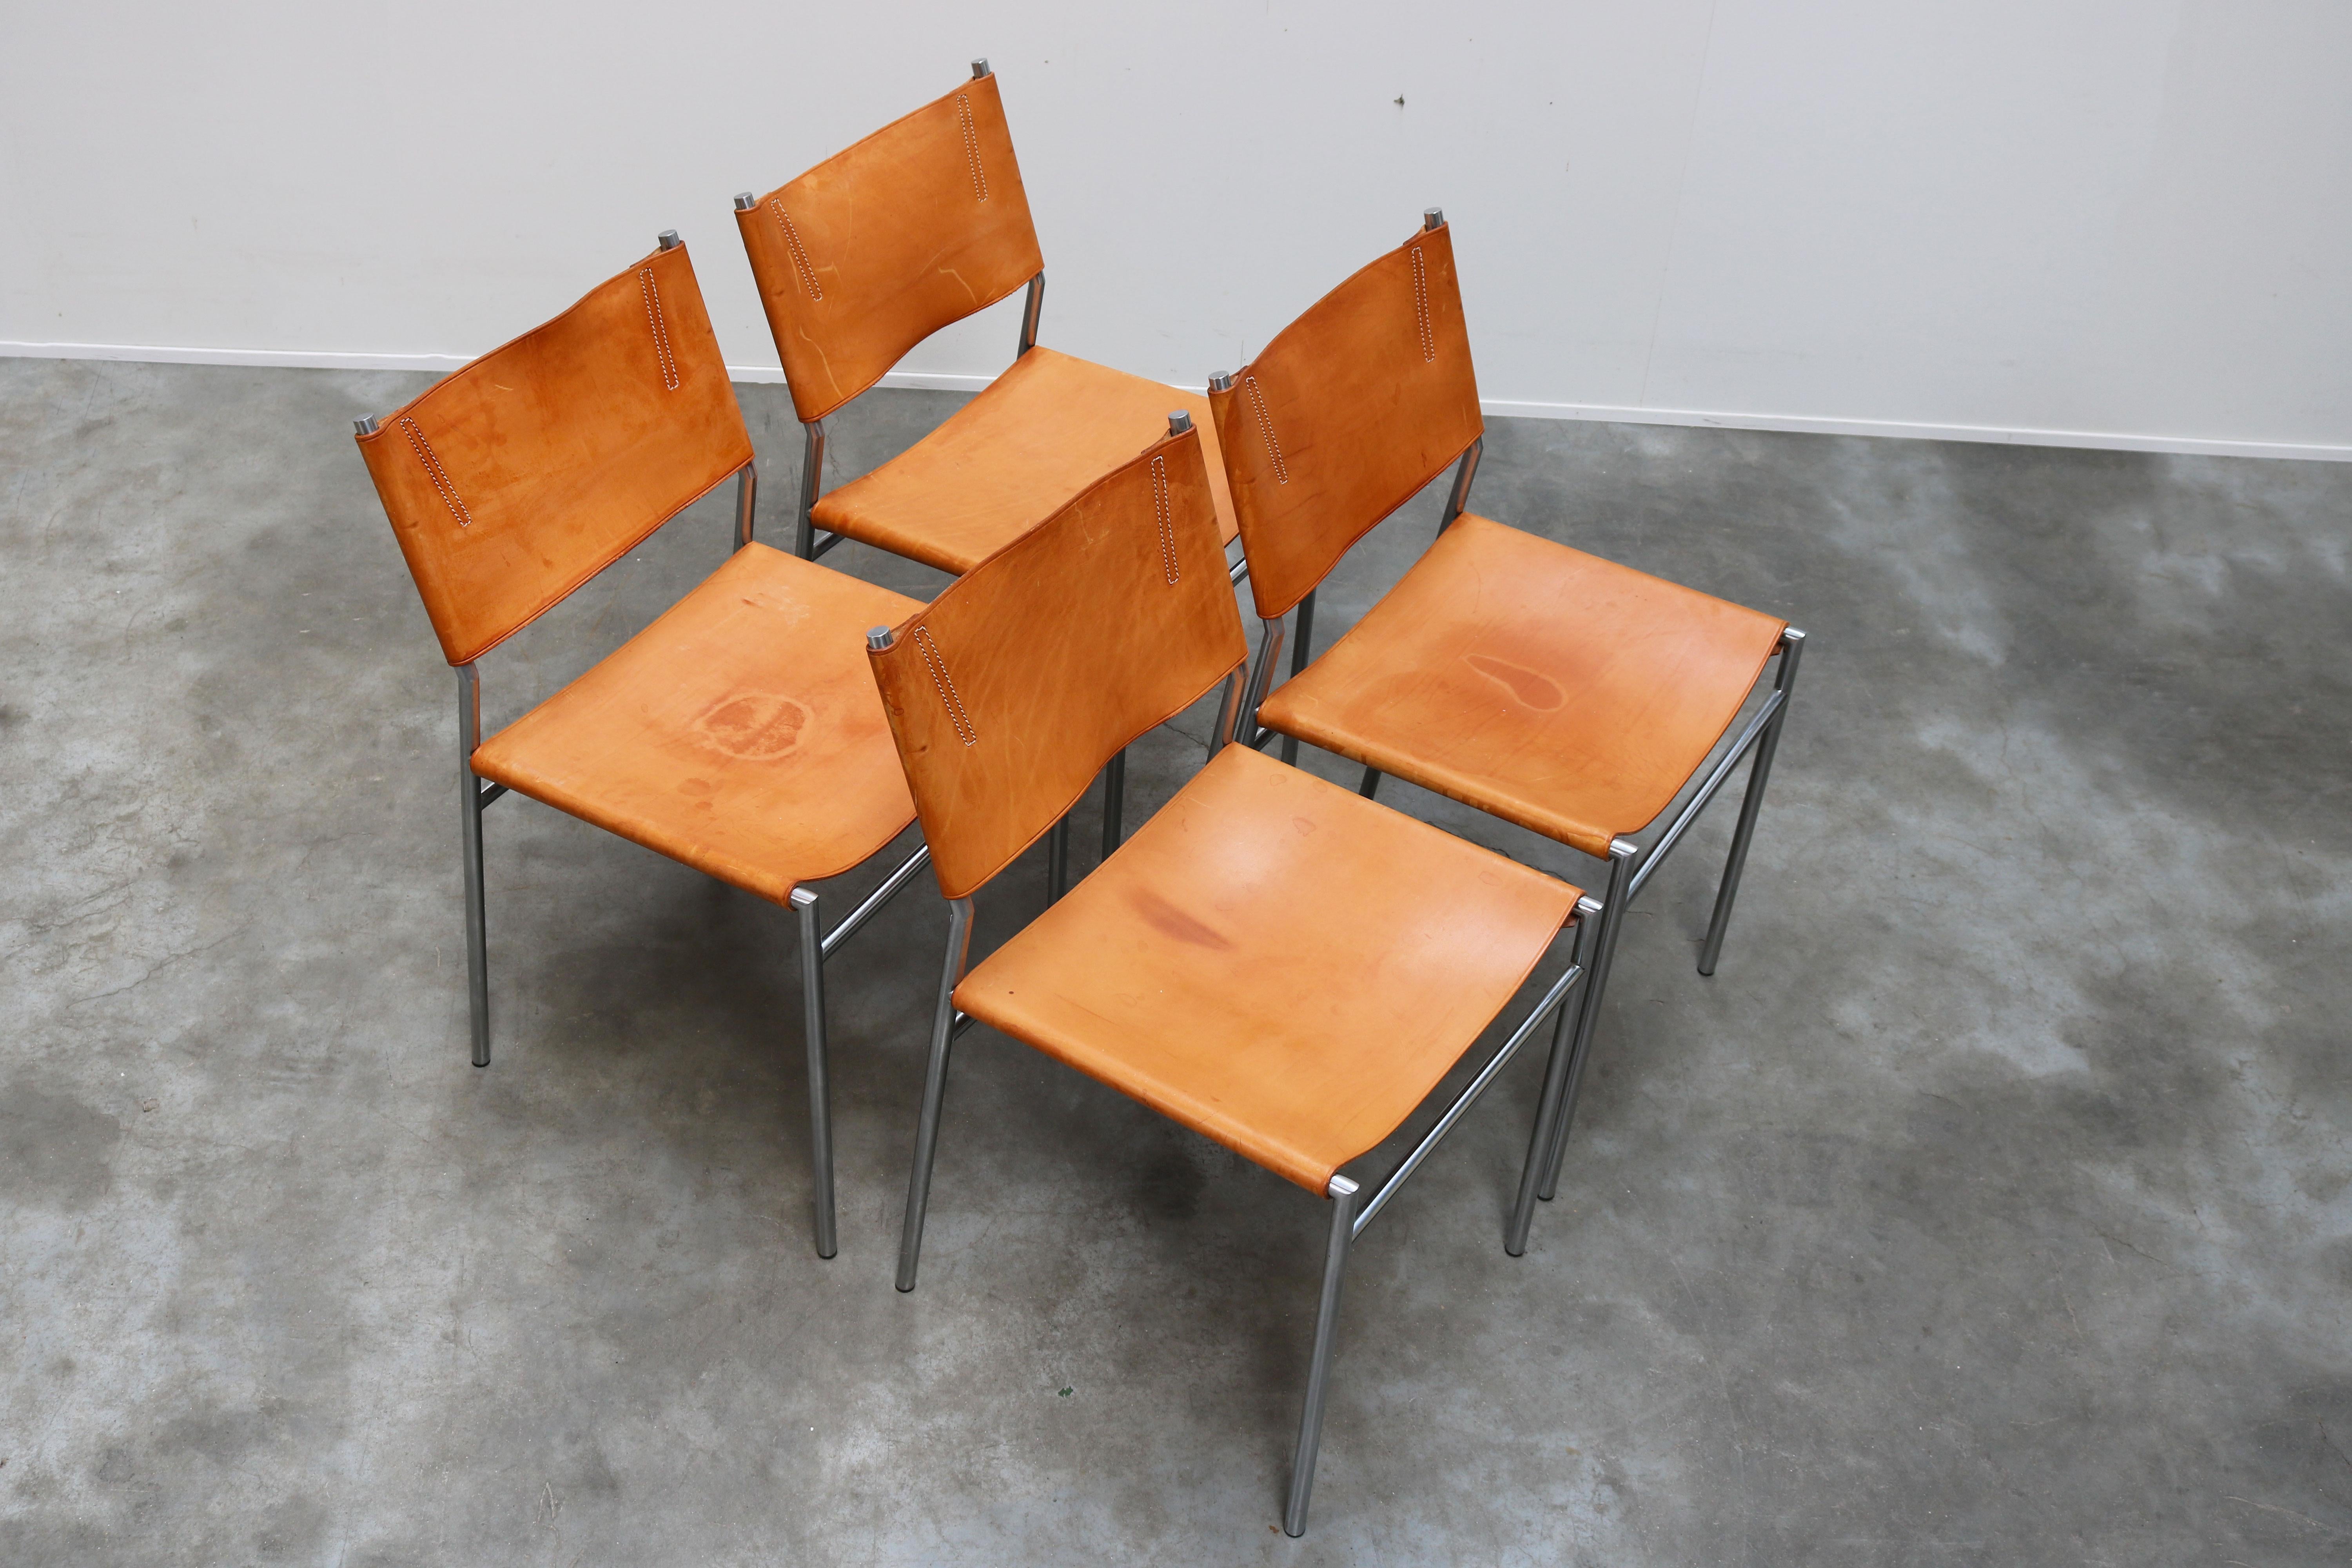 Magnificent pair of SZ01 minimalist chairs in Gocnac leather and chrome by Dutch industrial designer: Martin Visser for T' Spectrum in 1960. The minimalist tubular chrome frame in combination with the cognac leather upholstery was revolutionary for